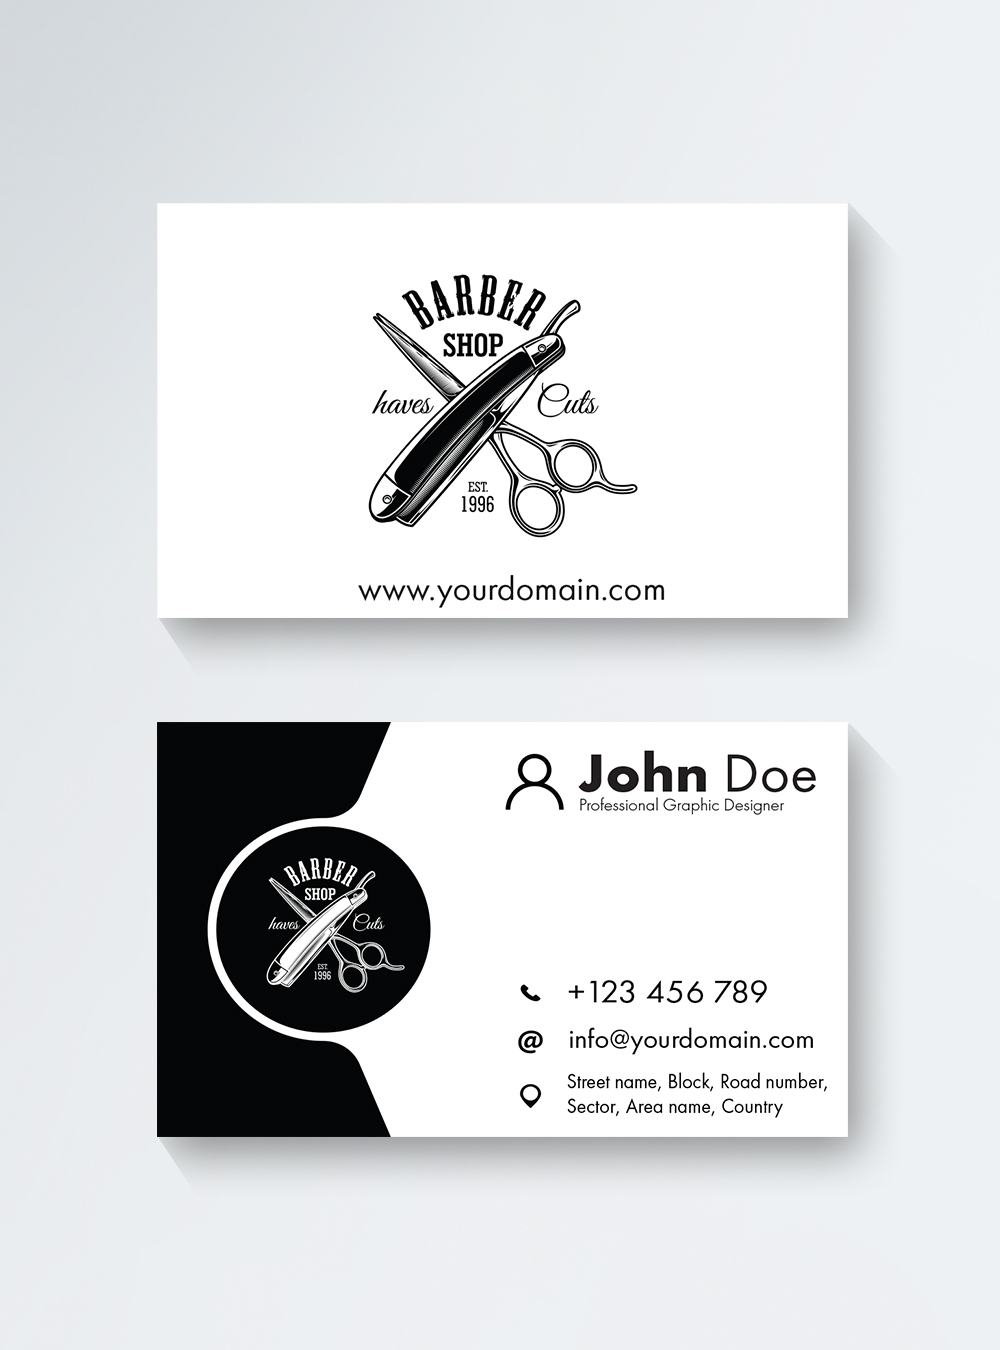 Black And White Creative Barber Shop Business Card Template Image Picture Free Download 450029790 Lovepik Com